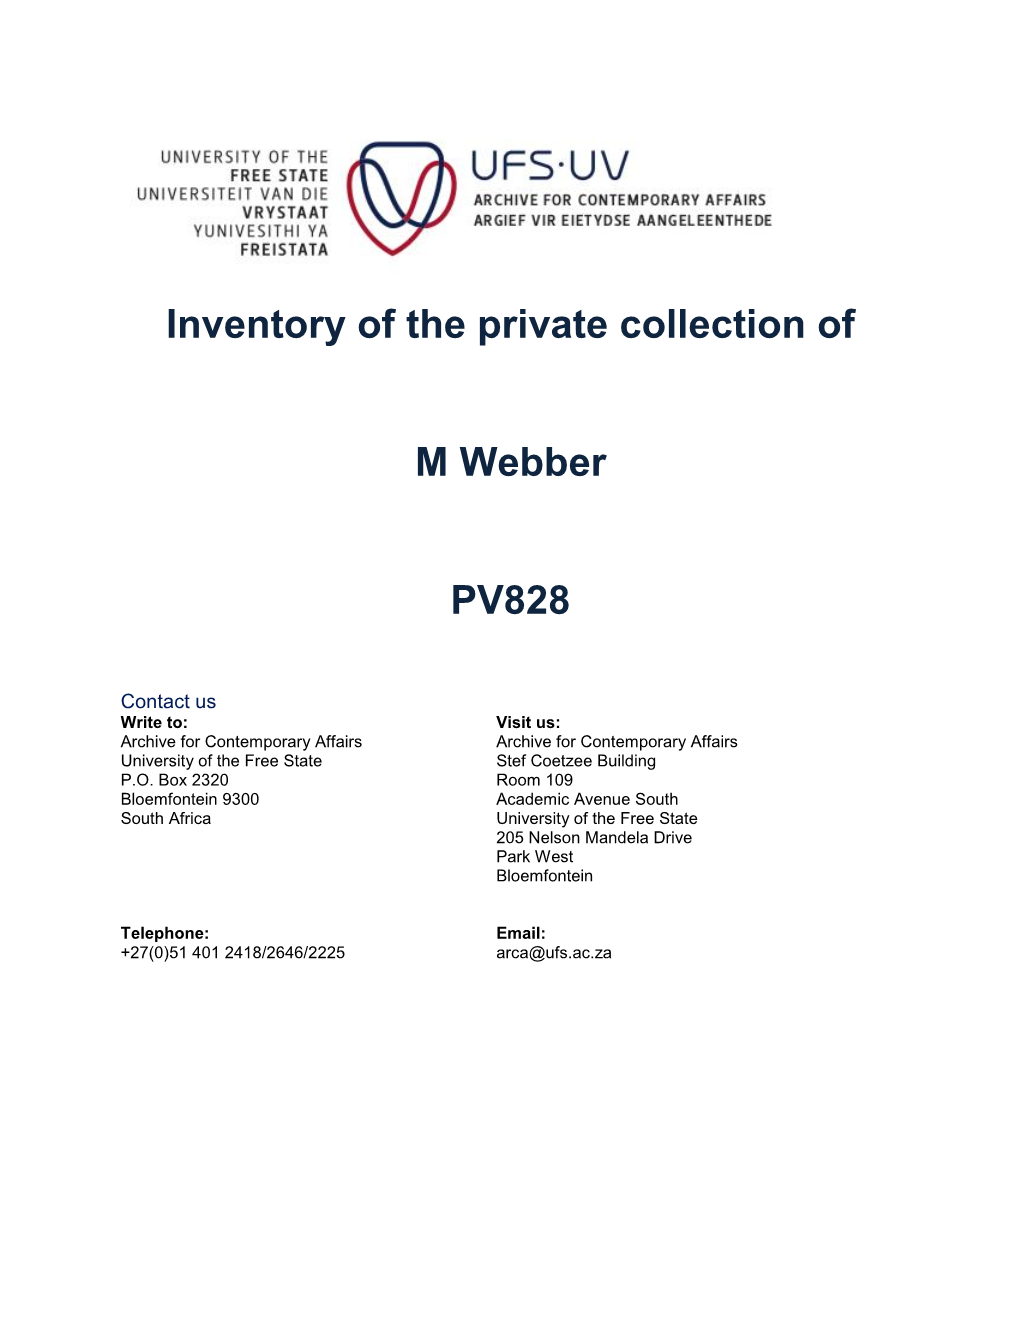 Inventory of the Private Collection of M Webber PV828